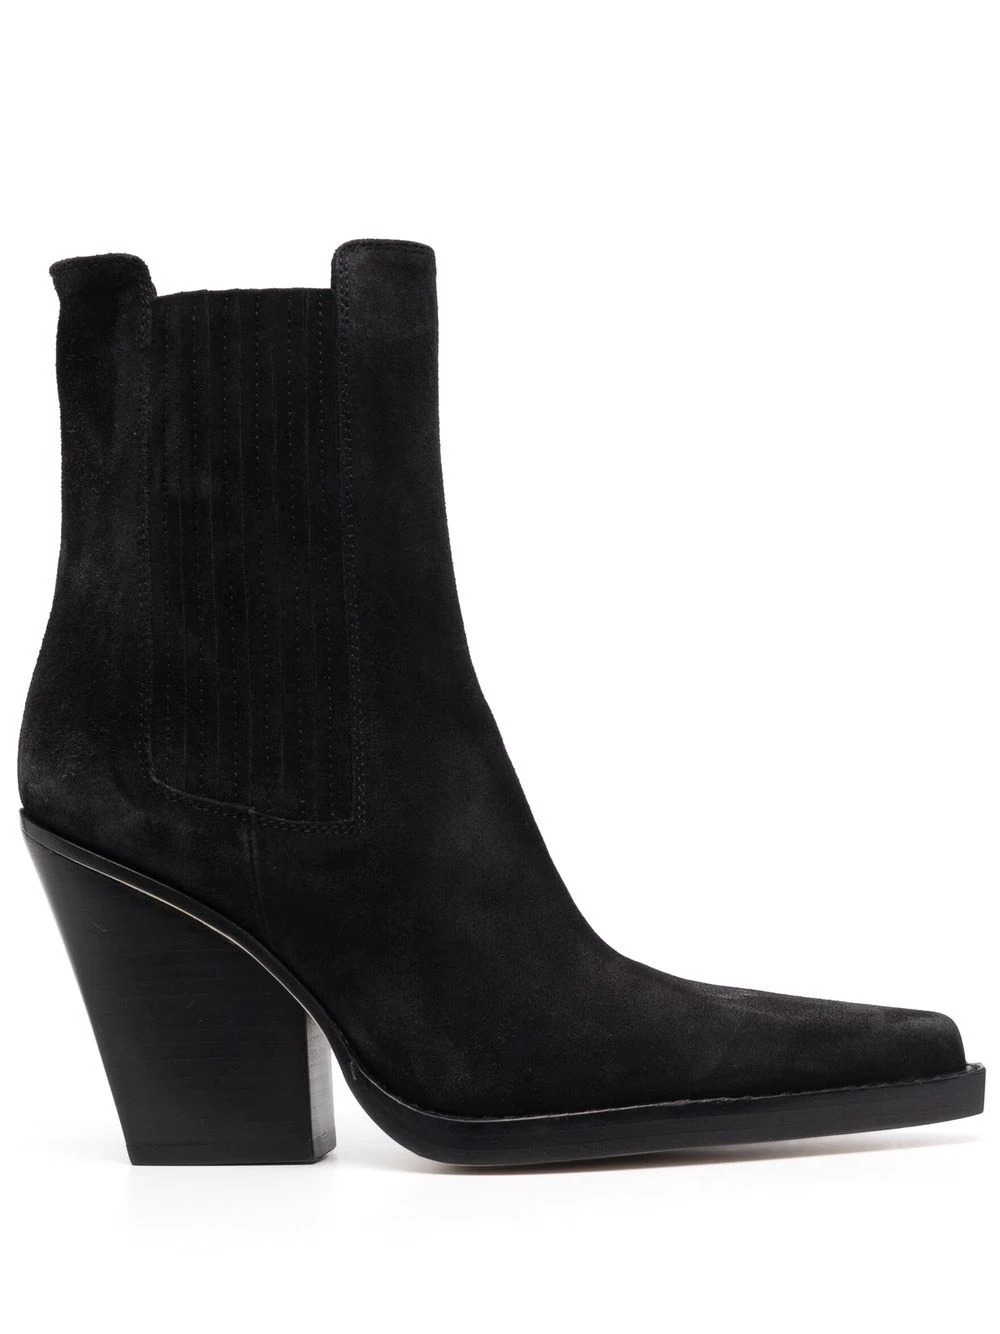 Paris Texas Black Dallas Ankle Boot In Calf Suede With Logo Detail On The Insole And 10.5cm Wide Heel